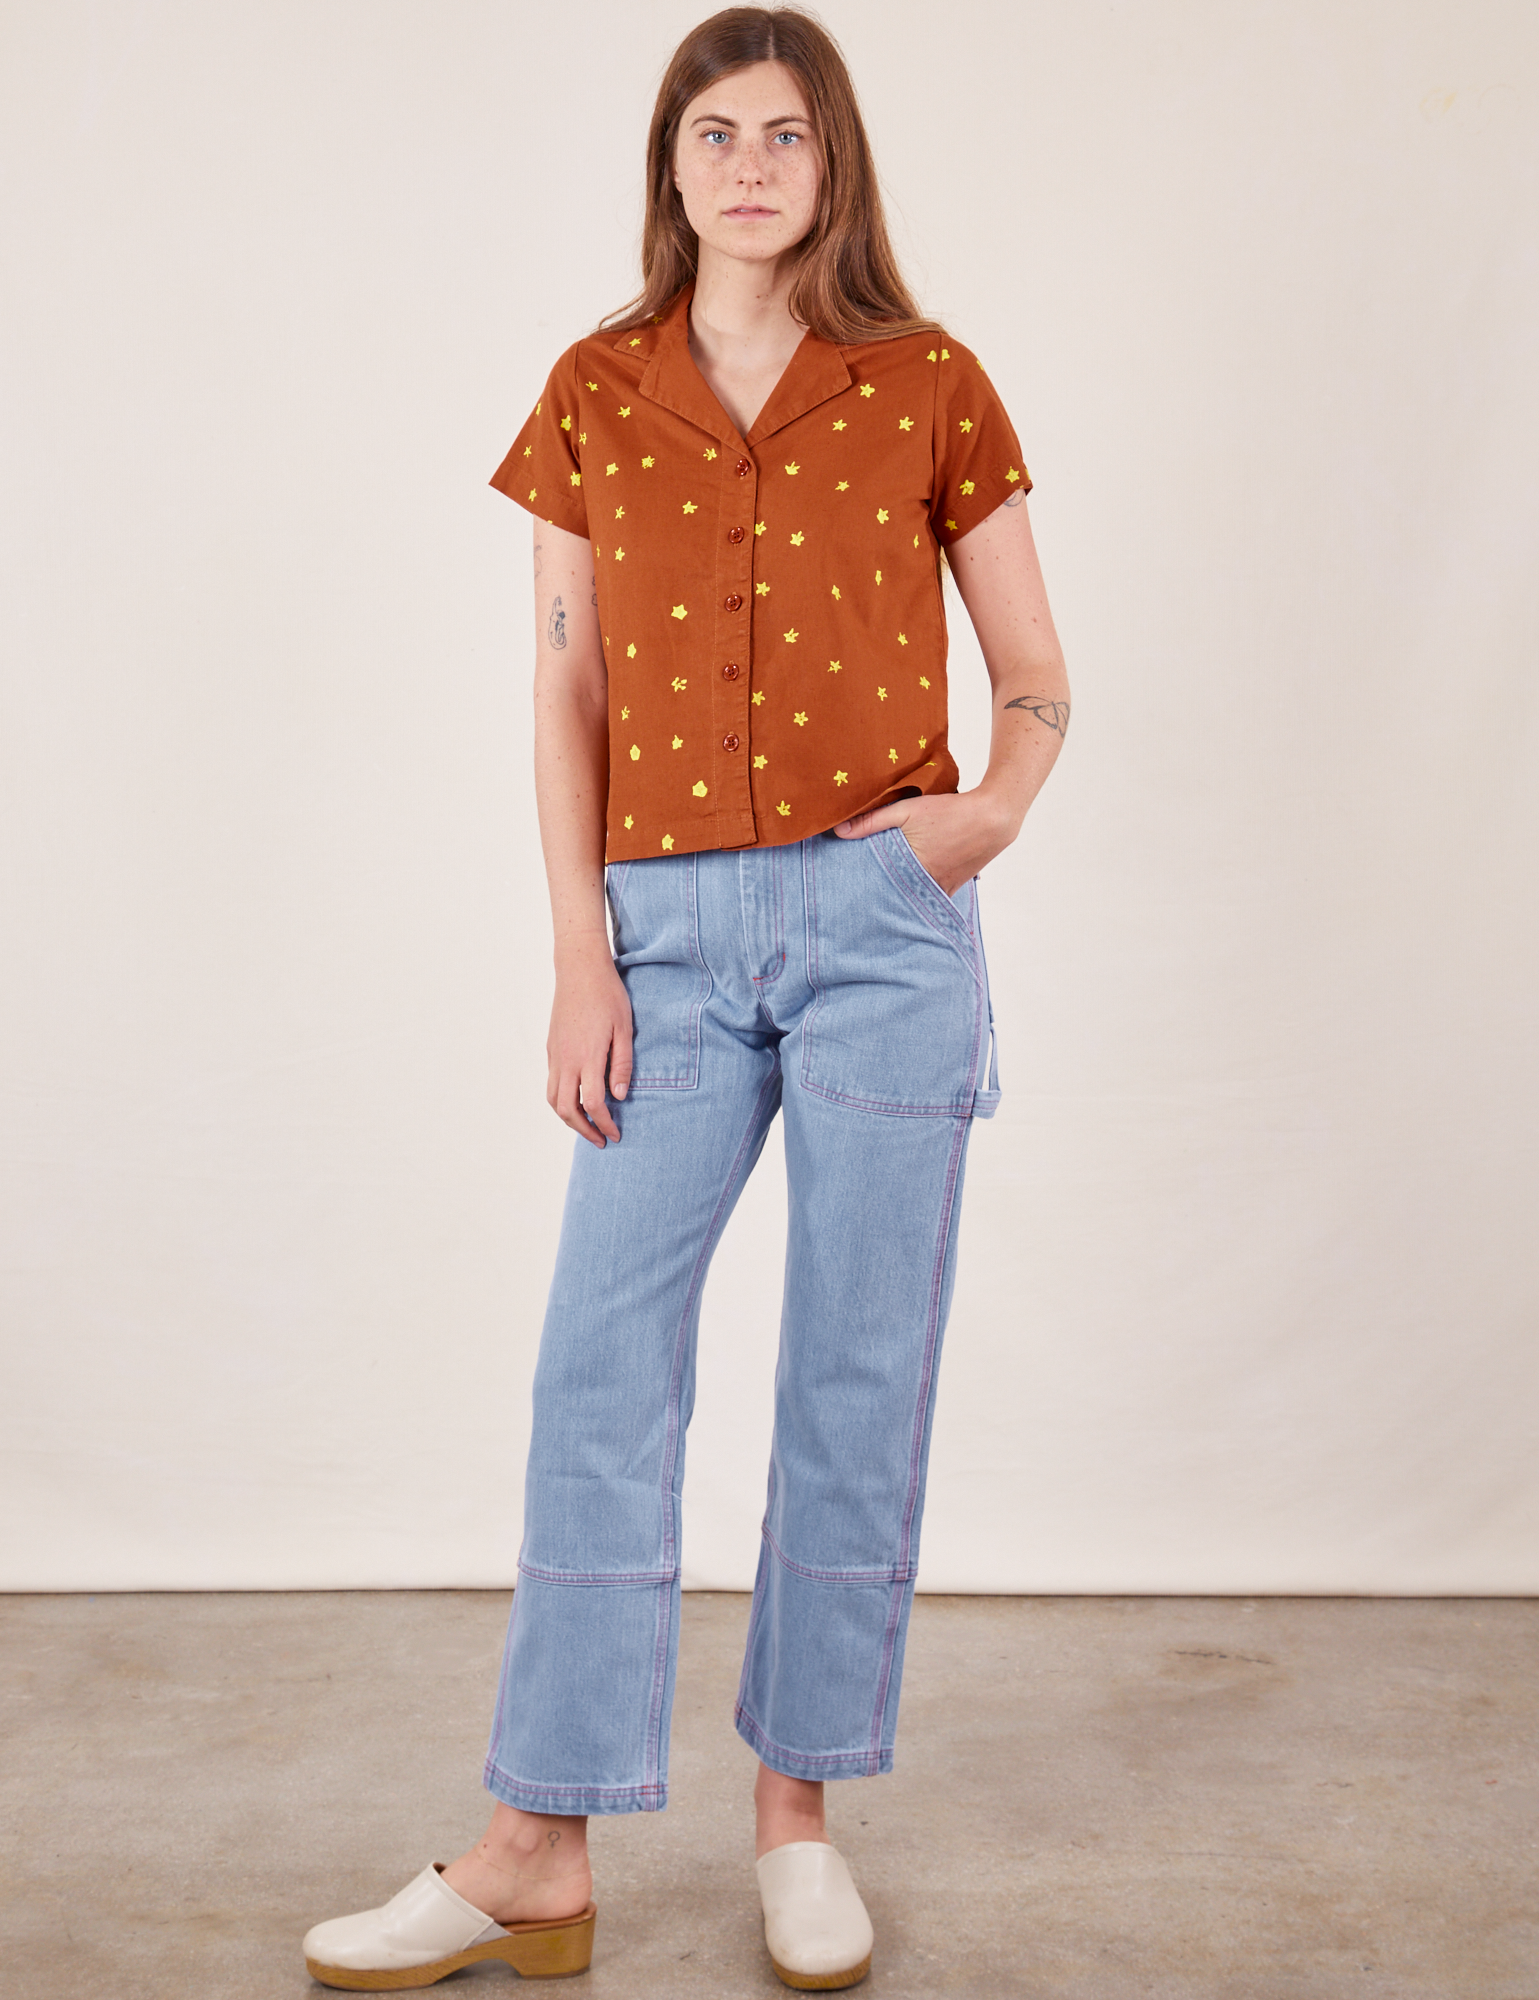 Scarlett is wearing Icon Pantry Button-Up in Stars and light wash Carpenter Jeans